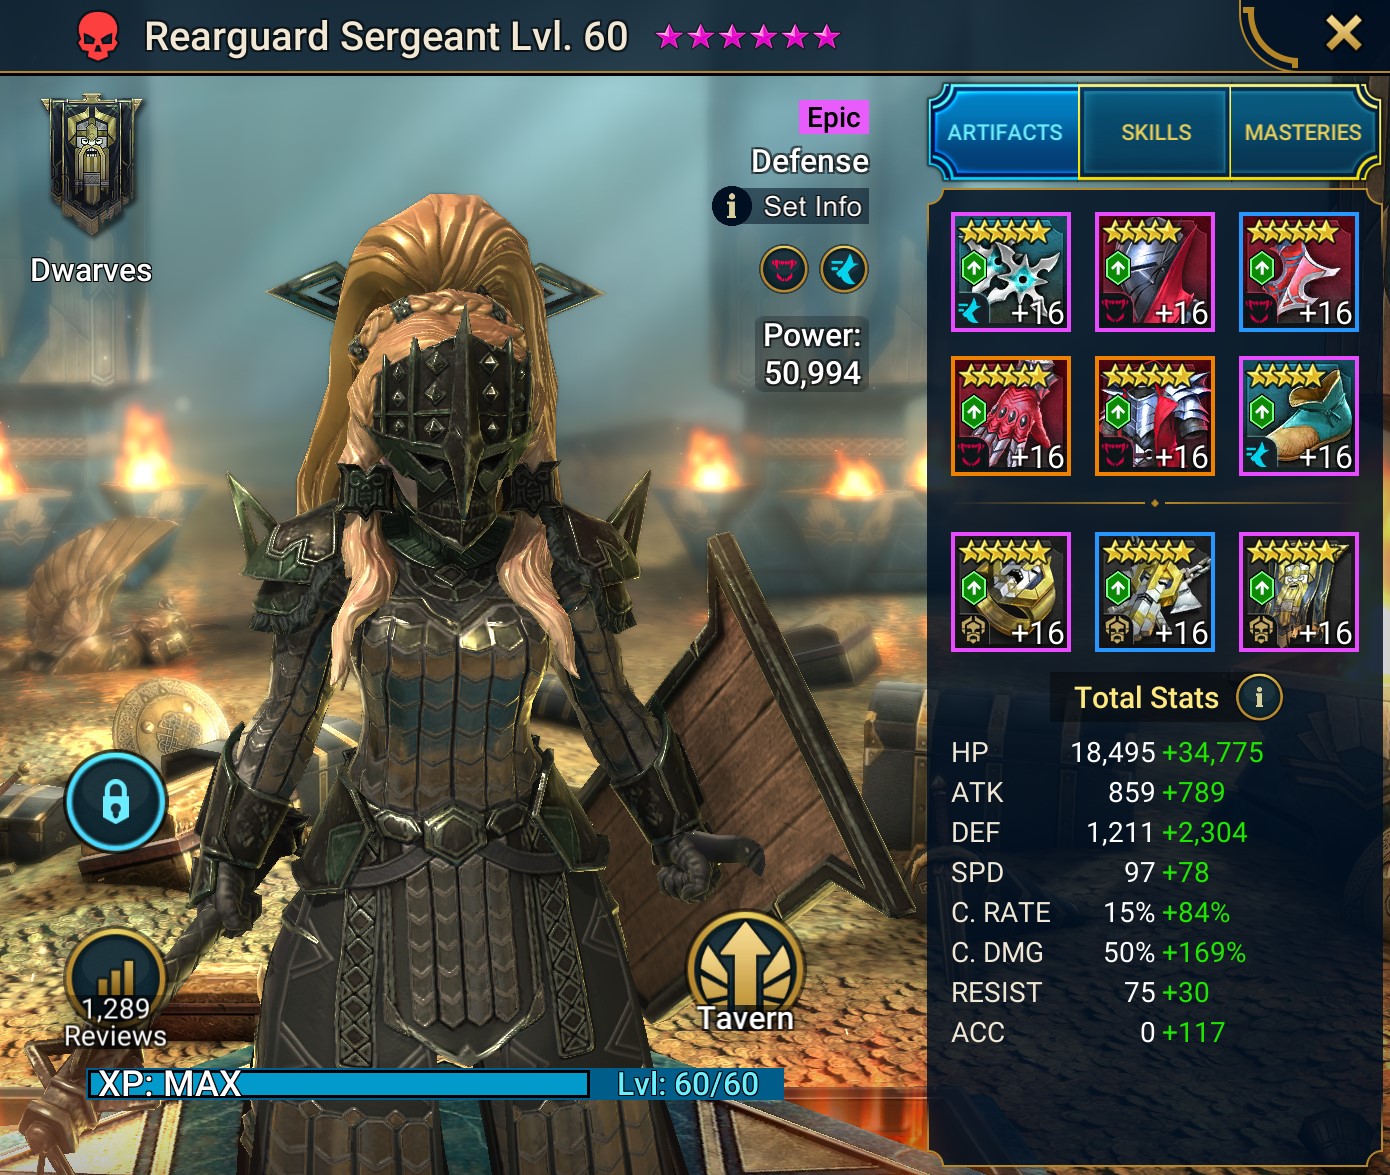 Rearguard Sergeant clan boss gear and stats build